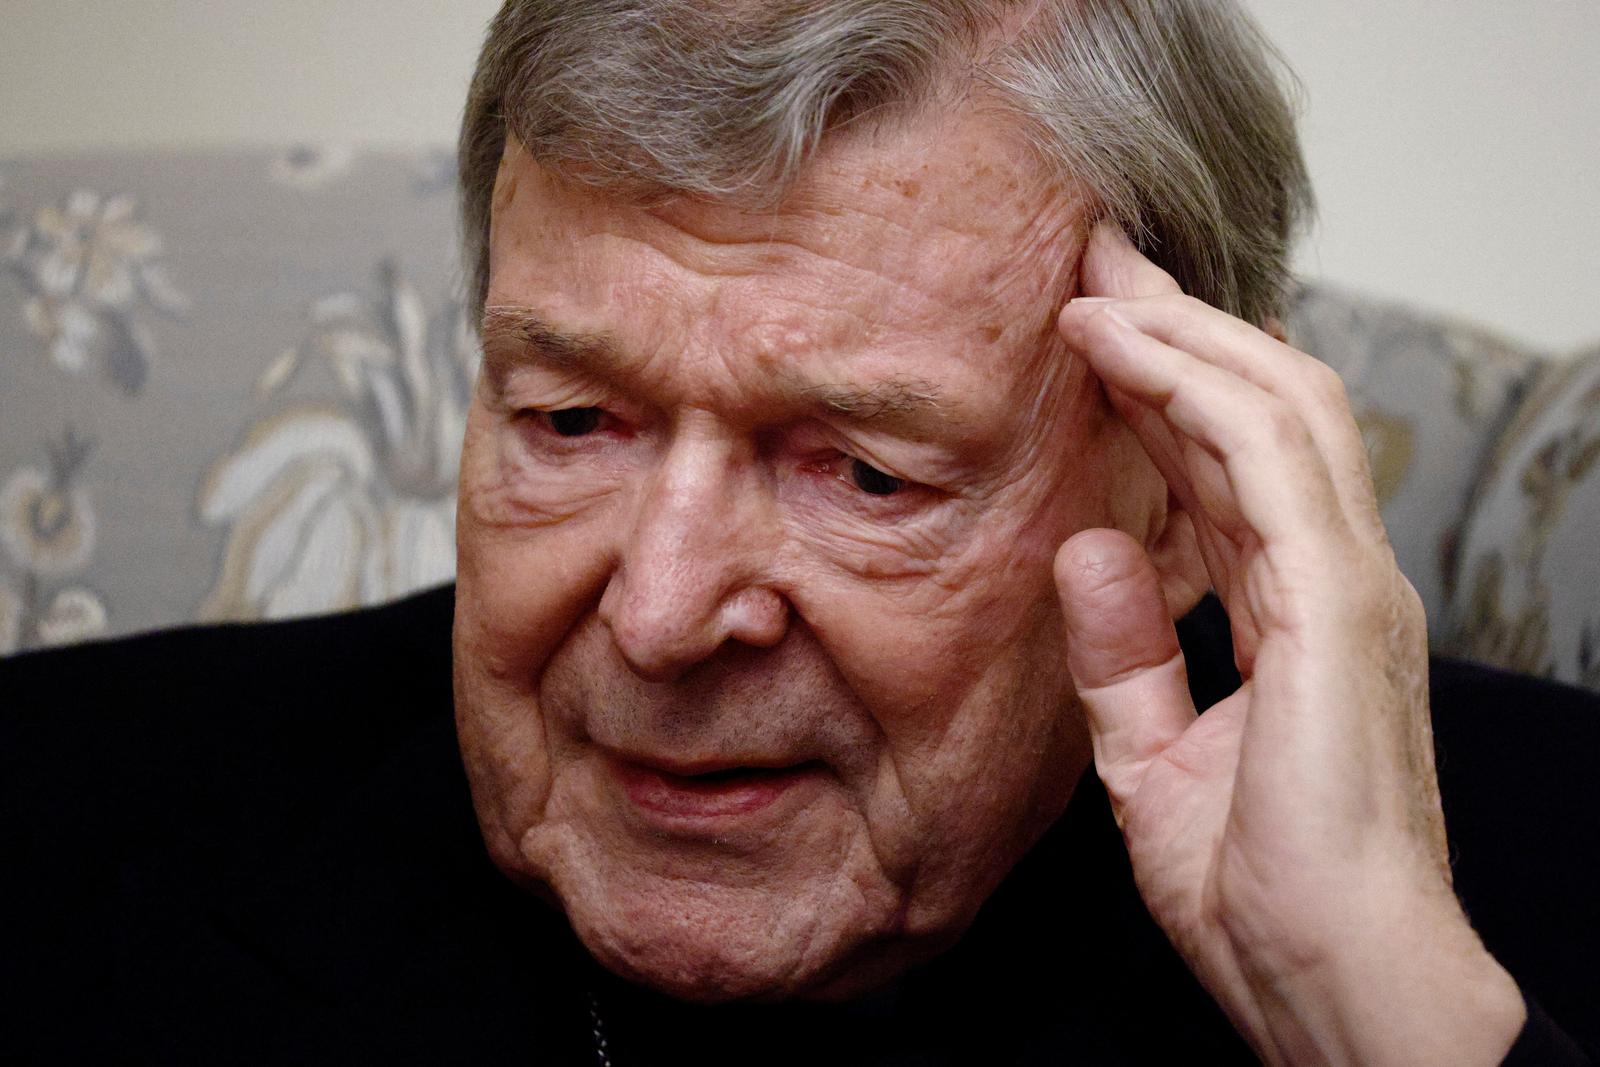 FILE PHOTO: Australian Cardinal George Pell looks on during an interview with Reuters in Rome, Italy December 7, 2020. Picture taken December 7, 2020. REUTERS/Guglielmo Mangiapane/File Photo Photo: GUGLIELMO MANGIAPANE/REUTERS